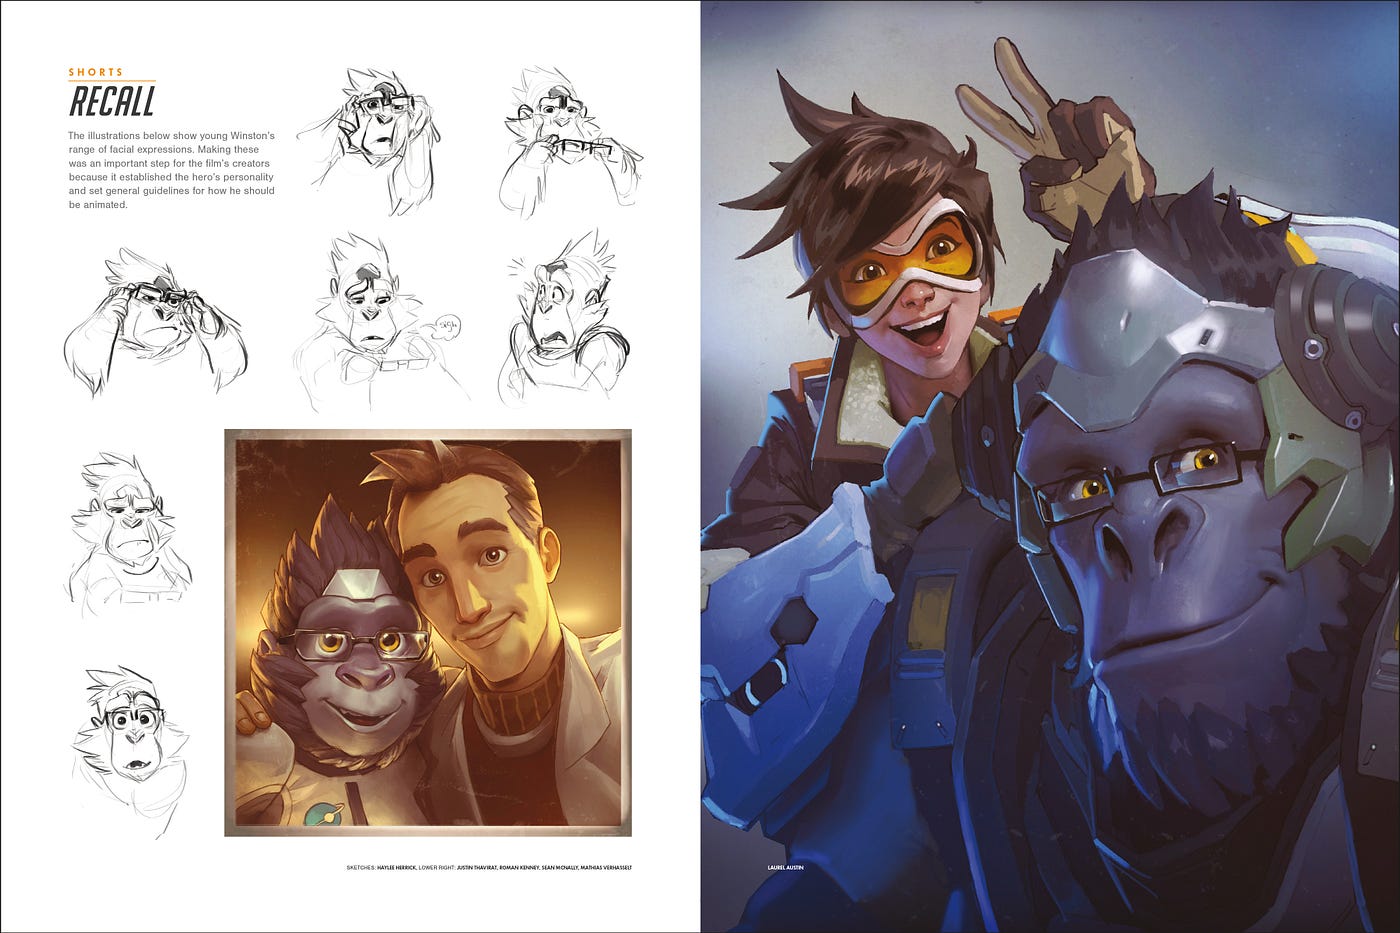 Tracer Overwatch 8 X 10 Print overwatch, Drawing, Art, Artwork, Gaming,  Blizzard, Decor 